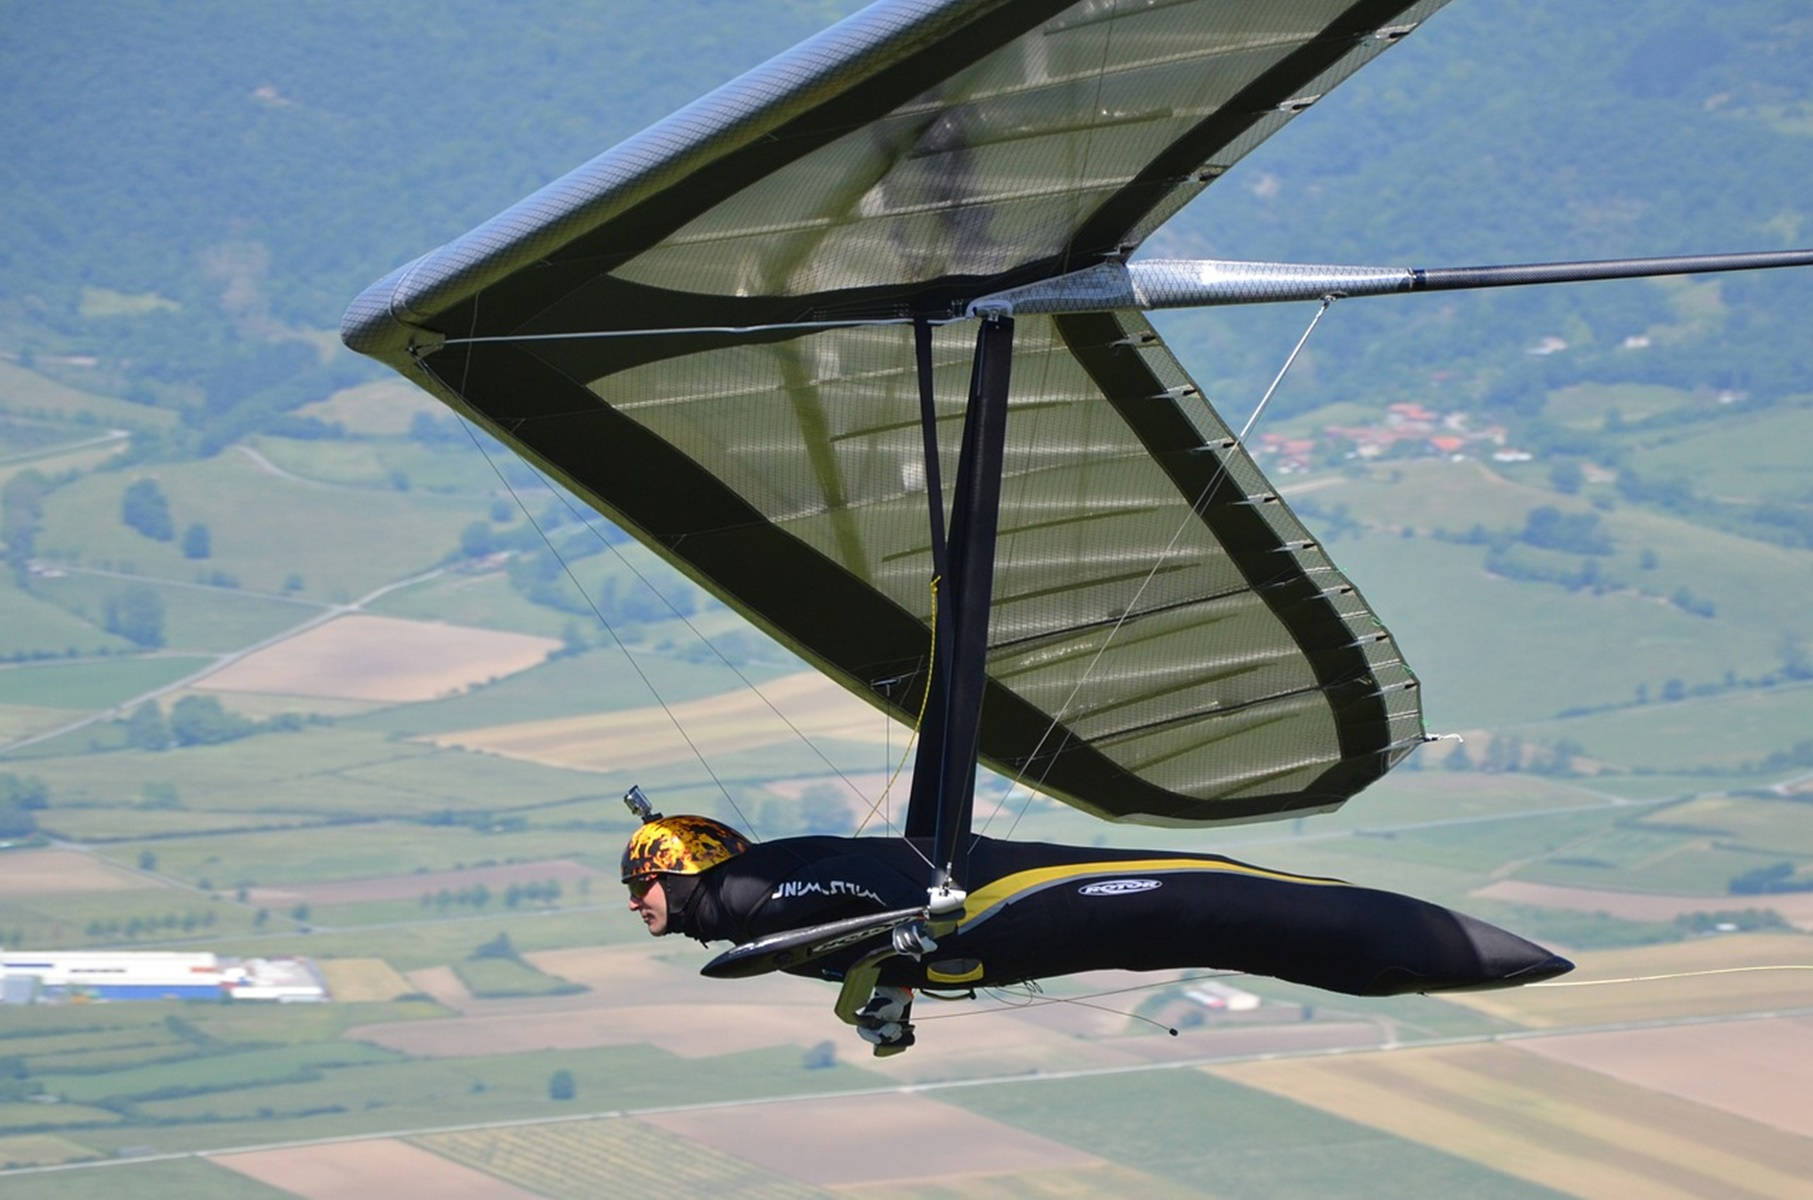 Aerial Reflection of Freedom - Hang Gliding Over Rio's Landscape Wallpaper